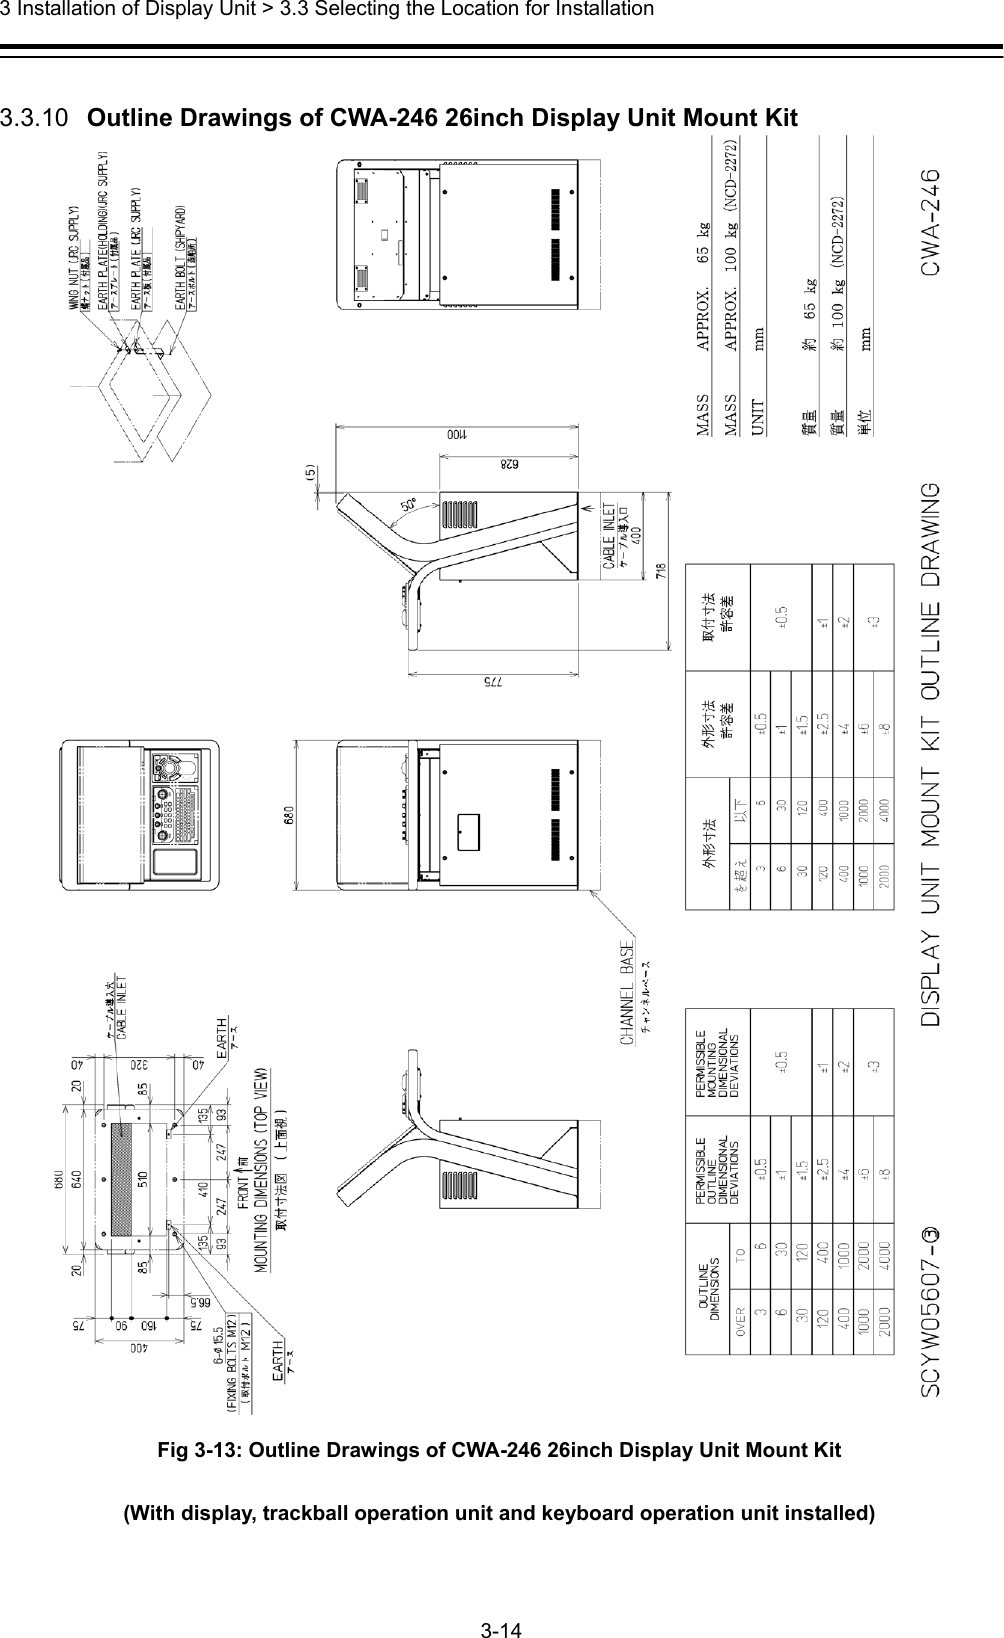  3 Installation of Display Unit &gt; 3.3 Selecting the Location for Installation 3-14   3.3.10   Outline Drawings of CWA-246 26inch Display Unit Mount Kit  Fig 3-13: Outline Drawings of CWA-246 26inch Display Unit Mount Kit   (With display, trackball operation unit and keyboard operation unit installed)